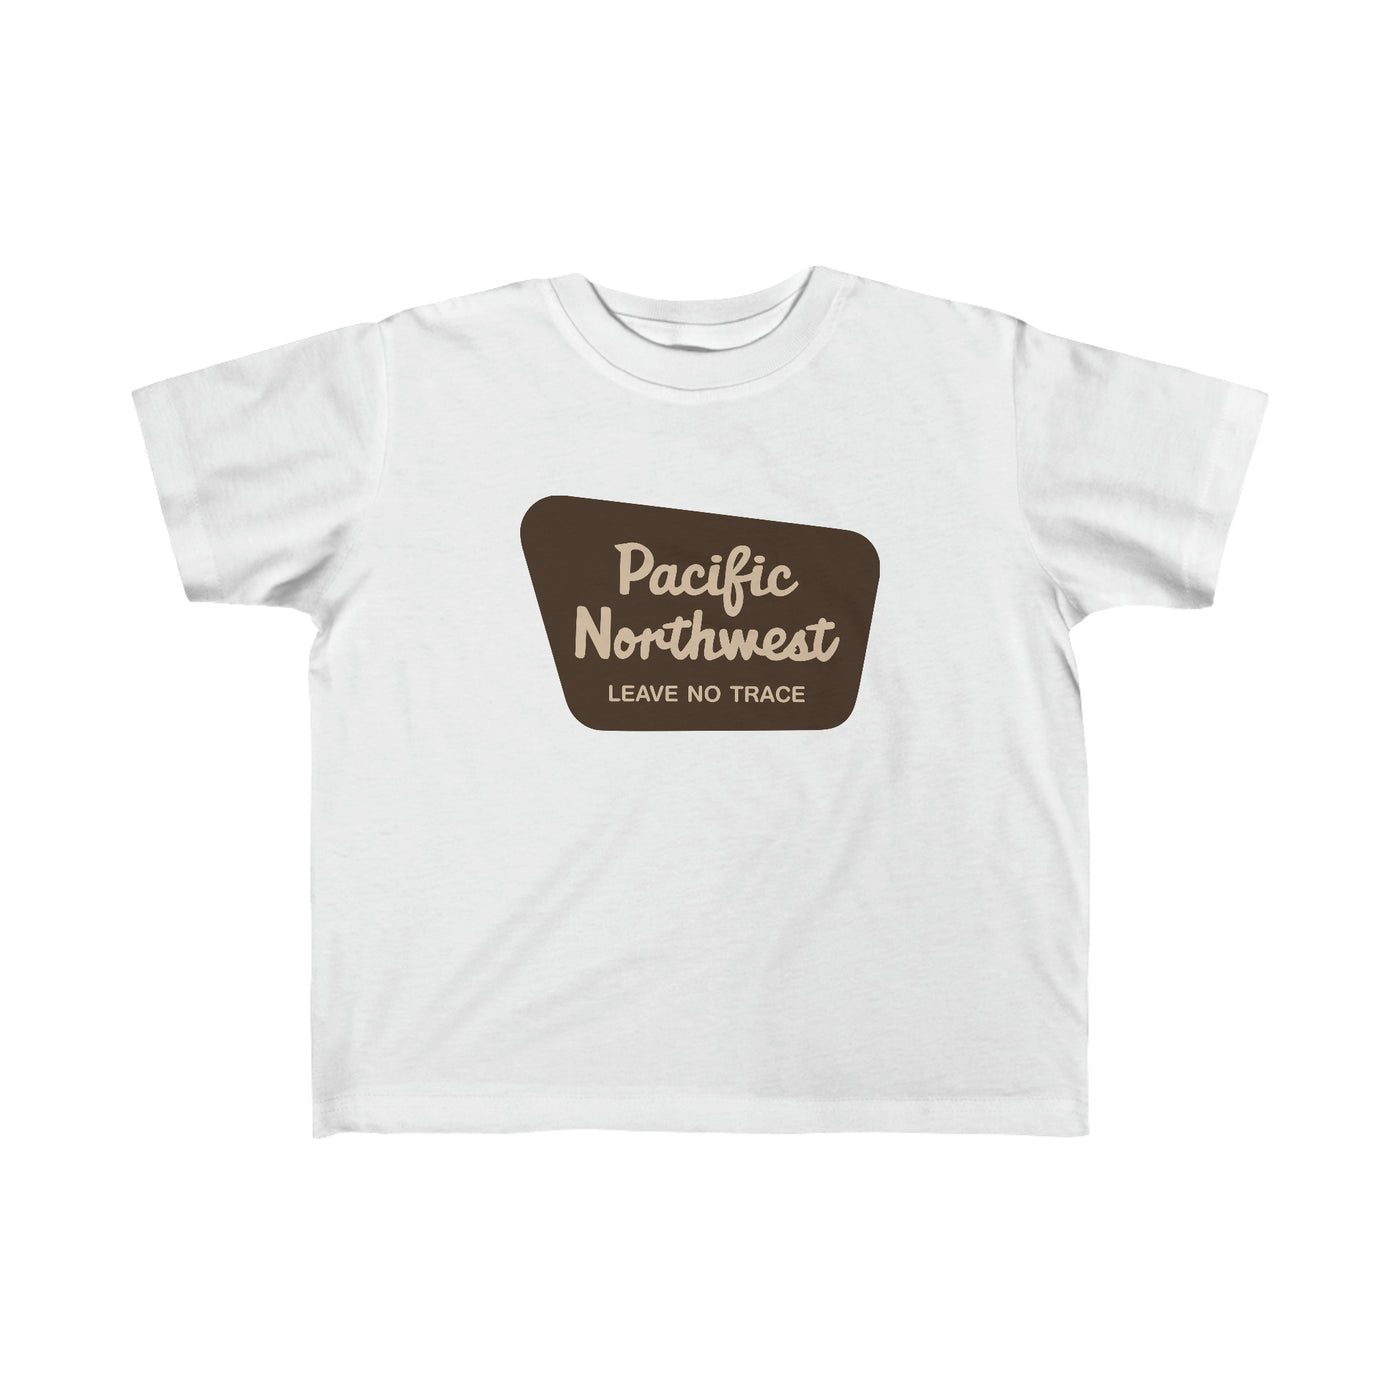 Pacific Northwest National Forest Toddler Tee